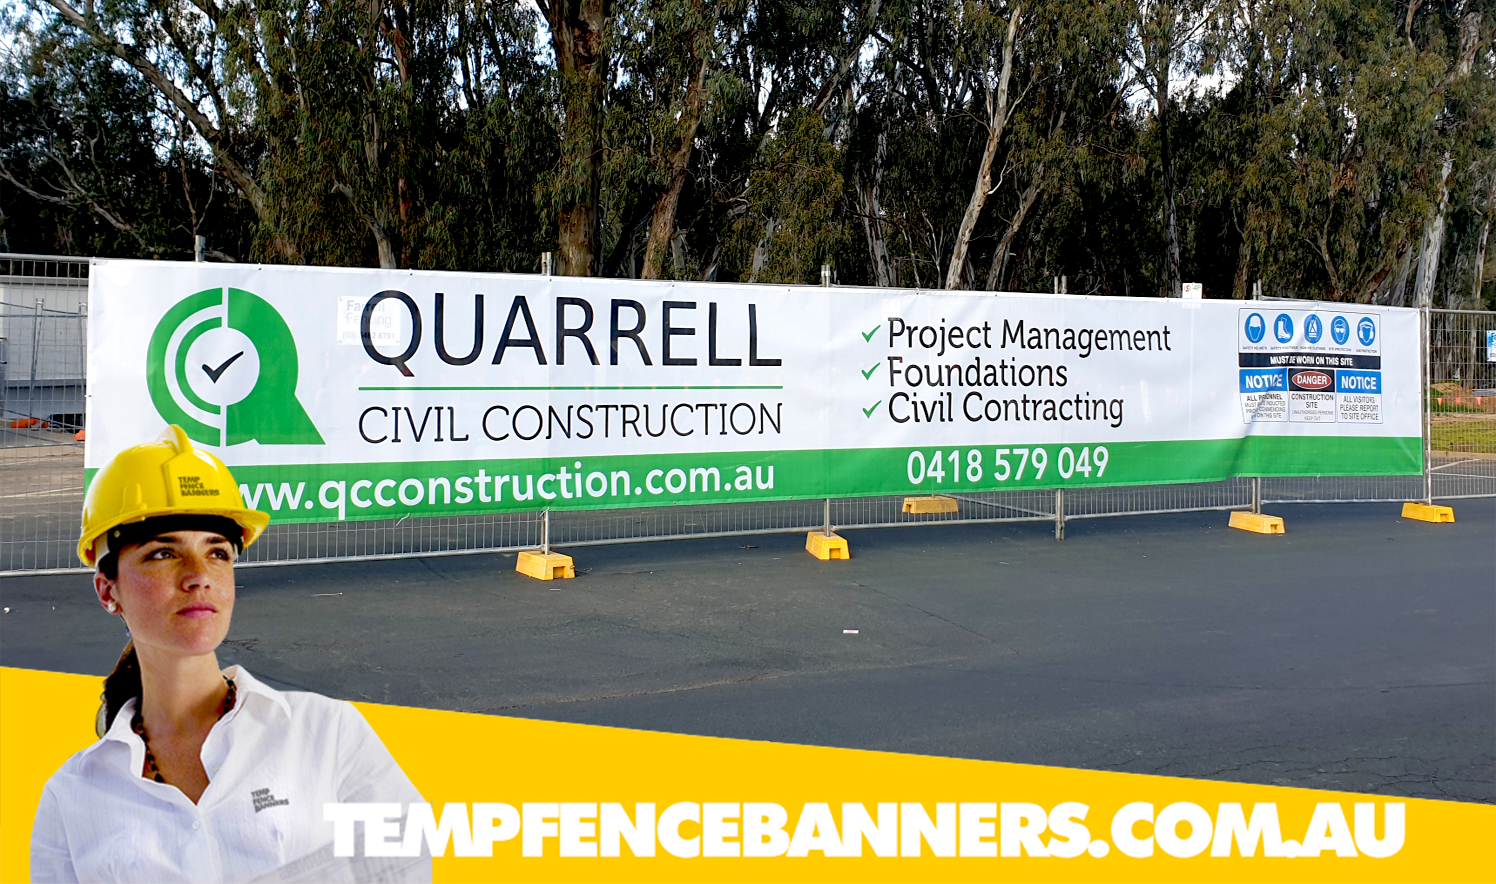 Tradie Pack Banners. Manufacturers of custom trade pack size fence mesh and standard panel banner mesh signage for construction site fencing.